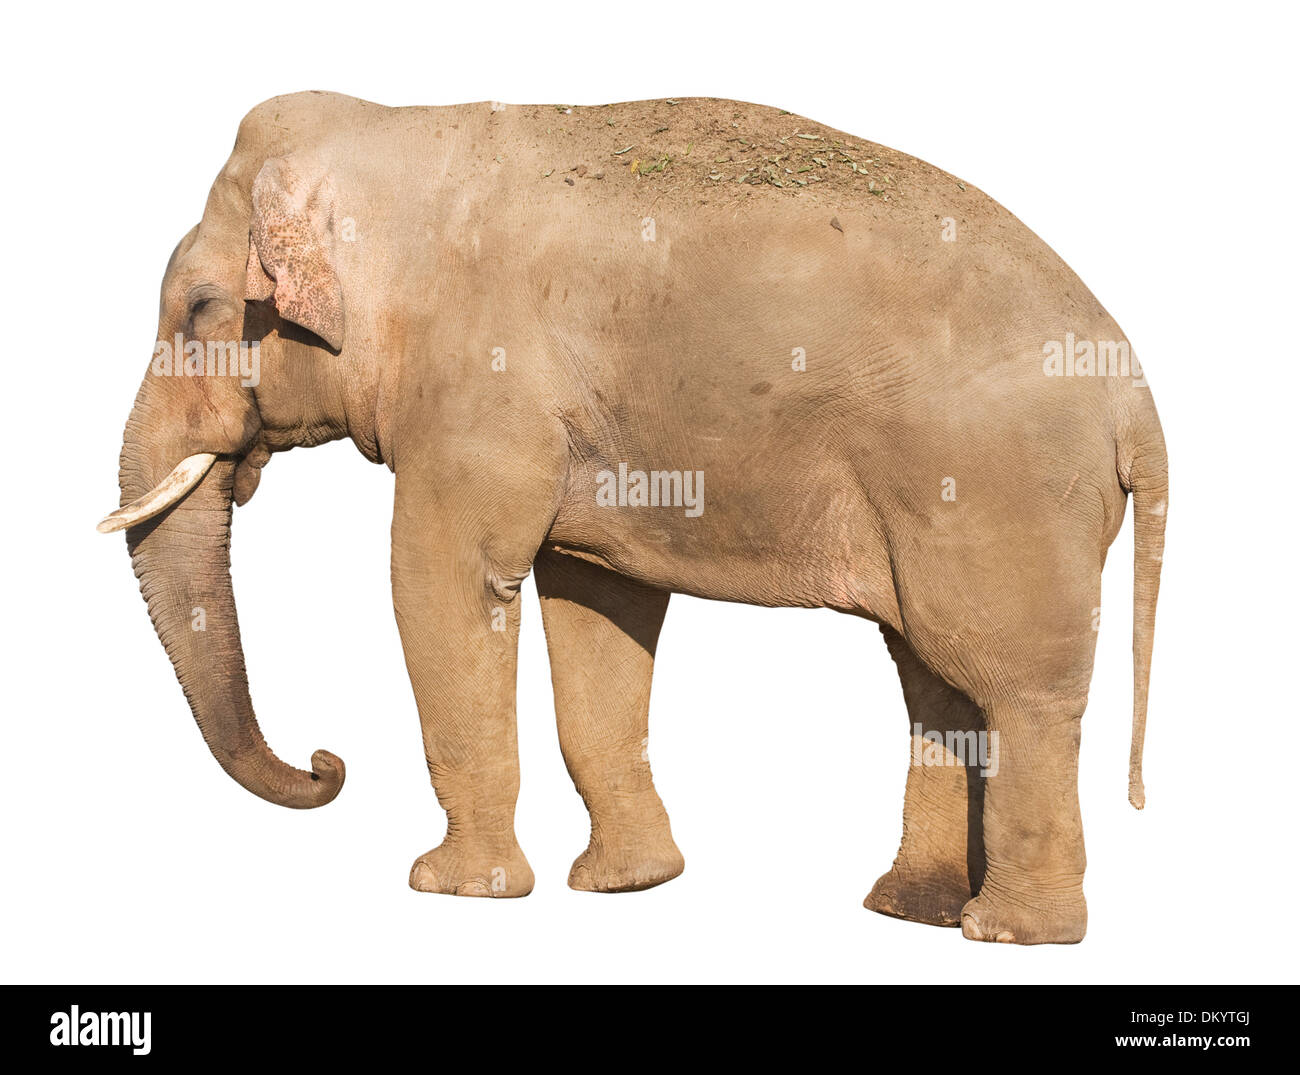 Article brown elephant isolated over white background, with clipping path Banque D'Images